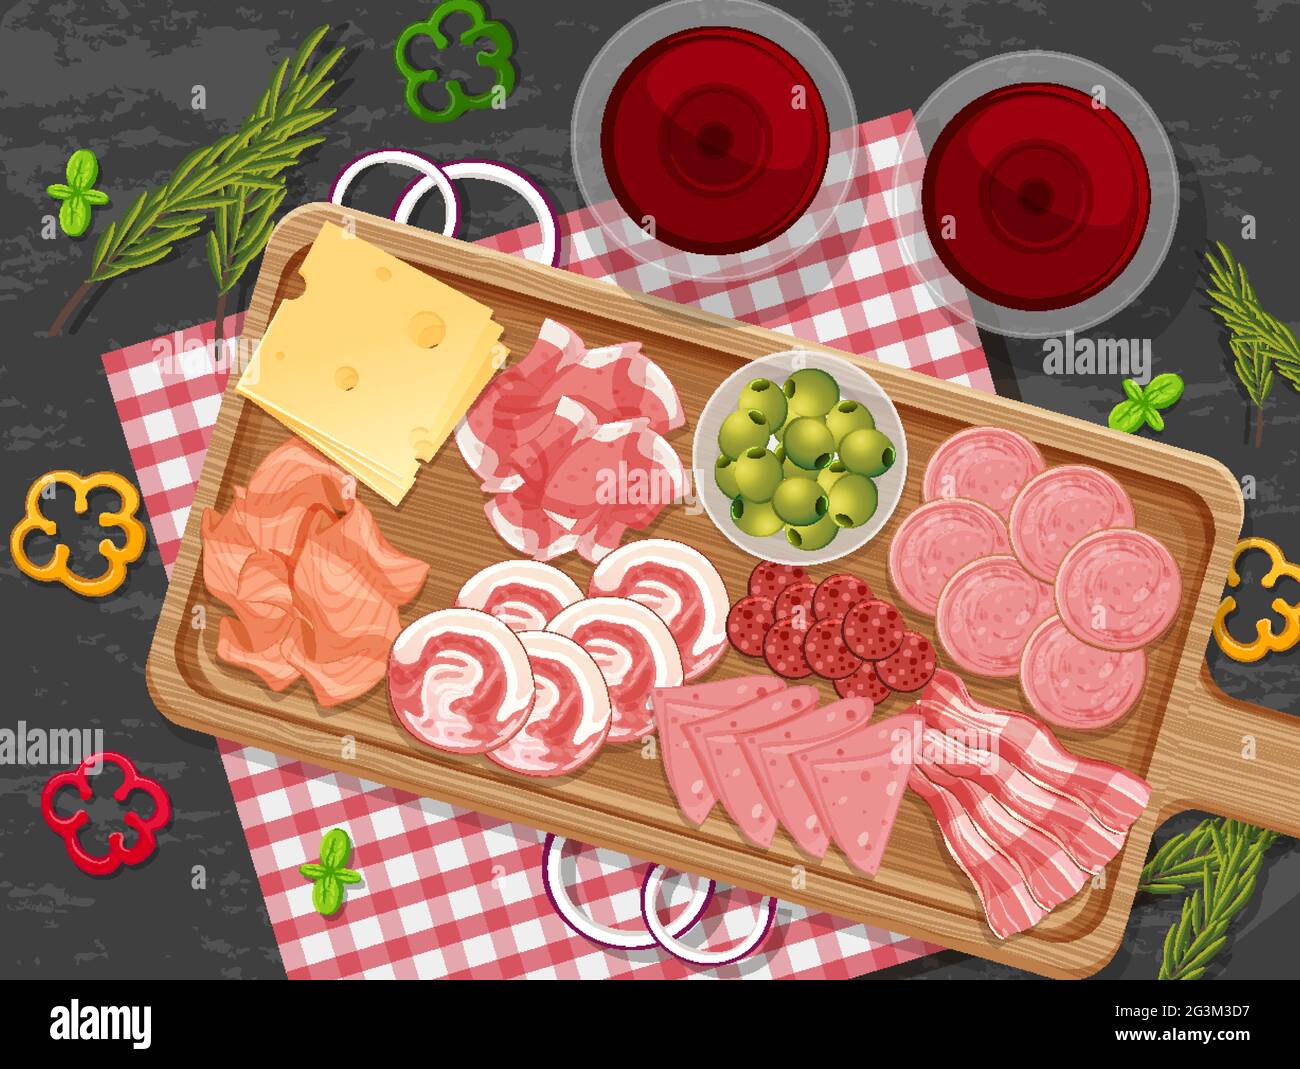 Platter of different cold meats on the table background illustration Stock Vector